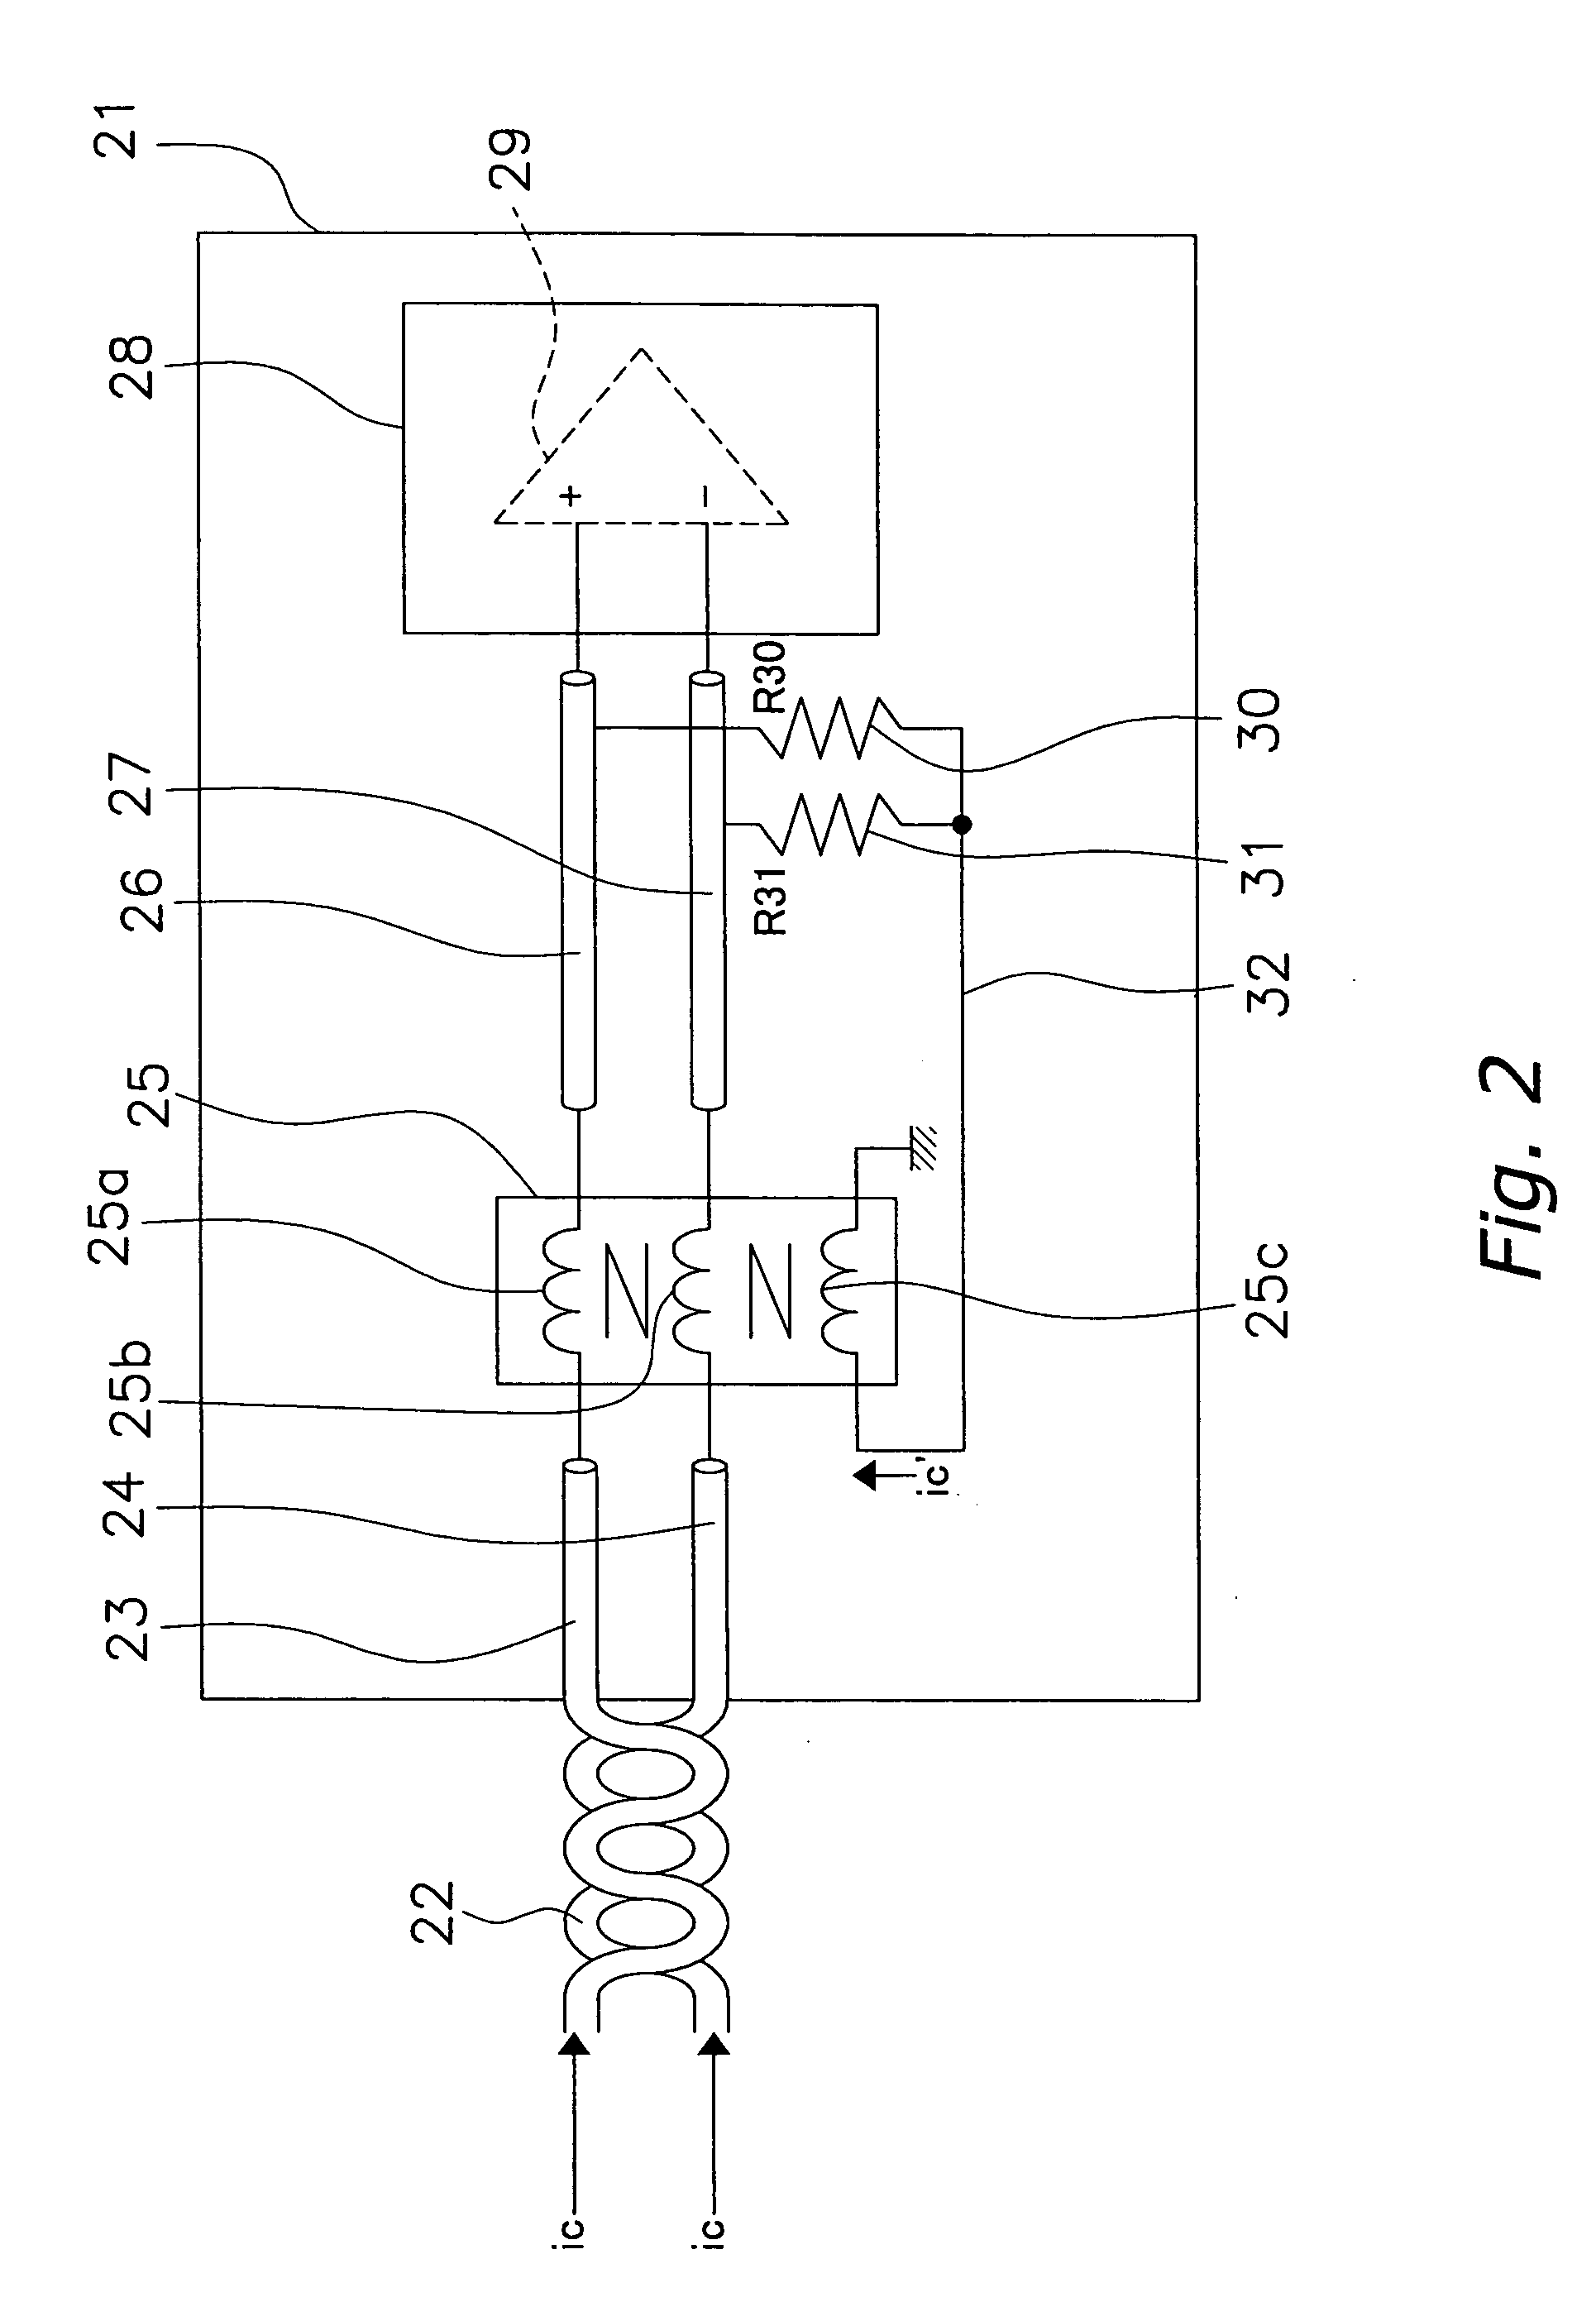 Differential transmission circuit and common mode choke coil